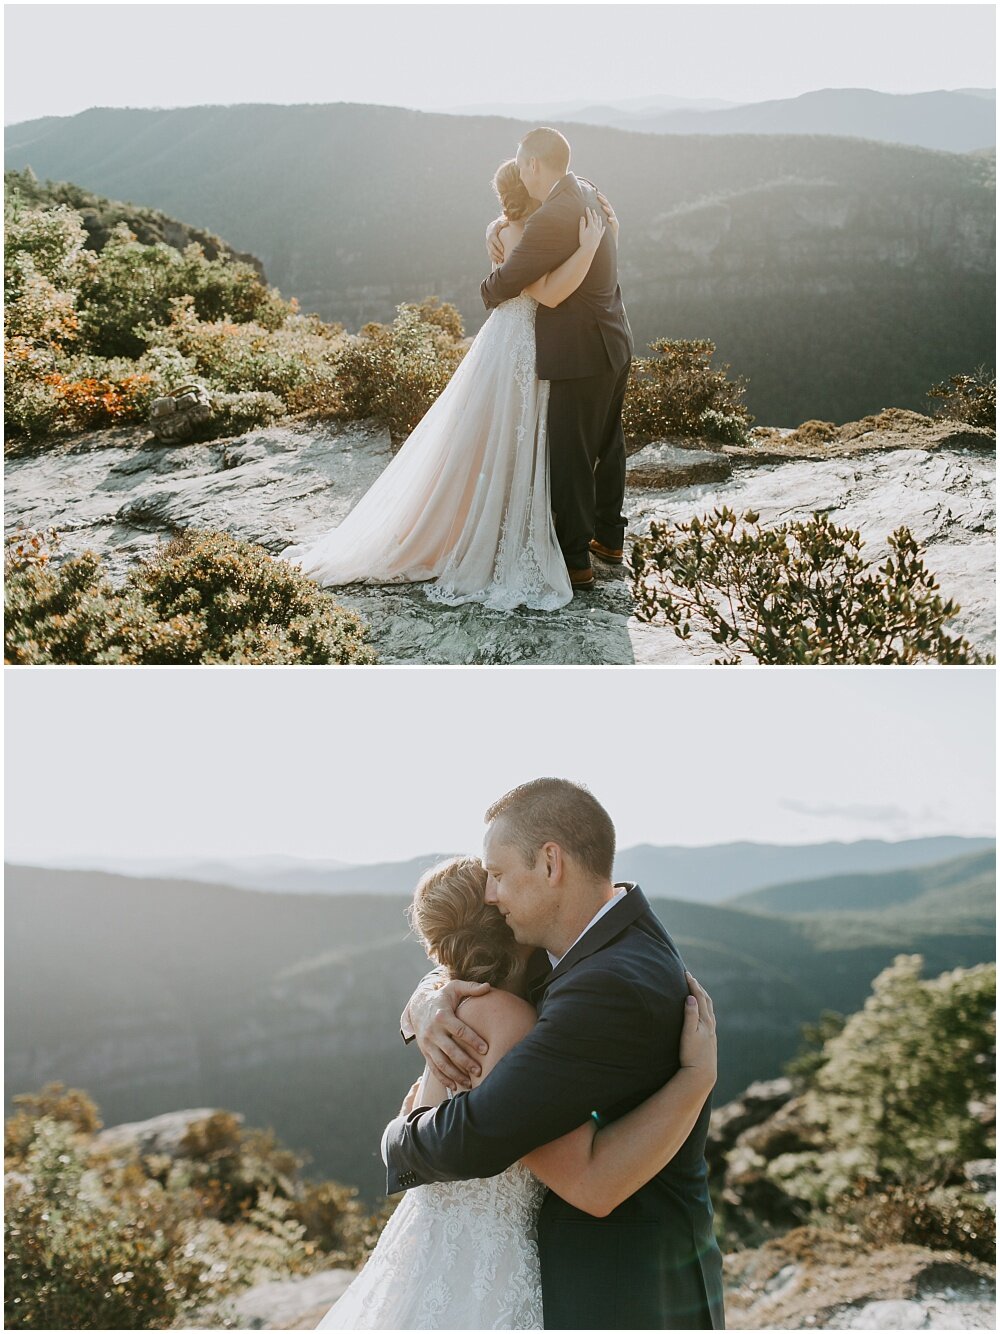 Bride and groom embracing on the mountain.